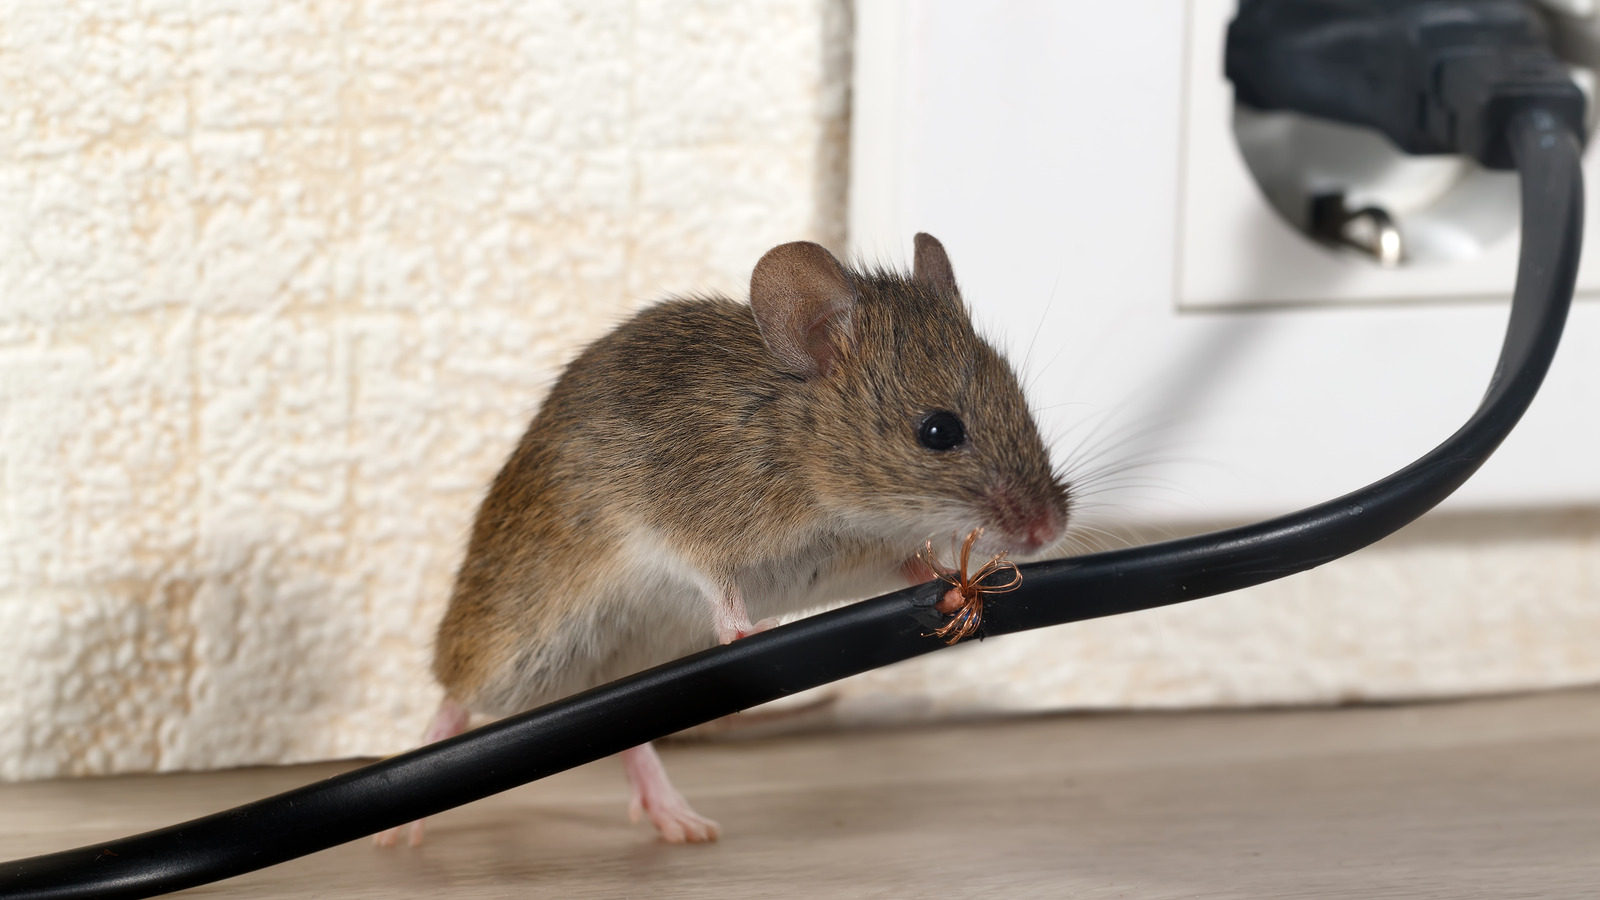 An Old Shoebox Is The Secret To Ridding Your Home Of Pesky Mice